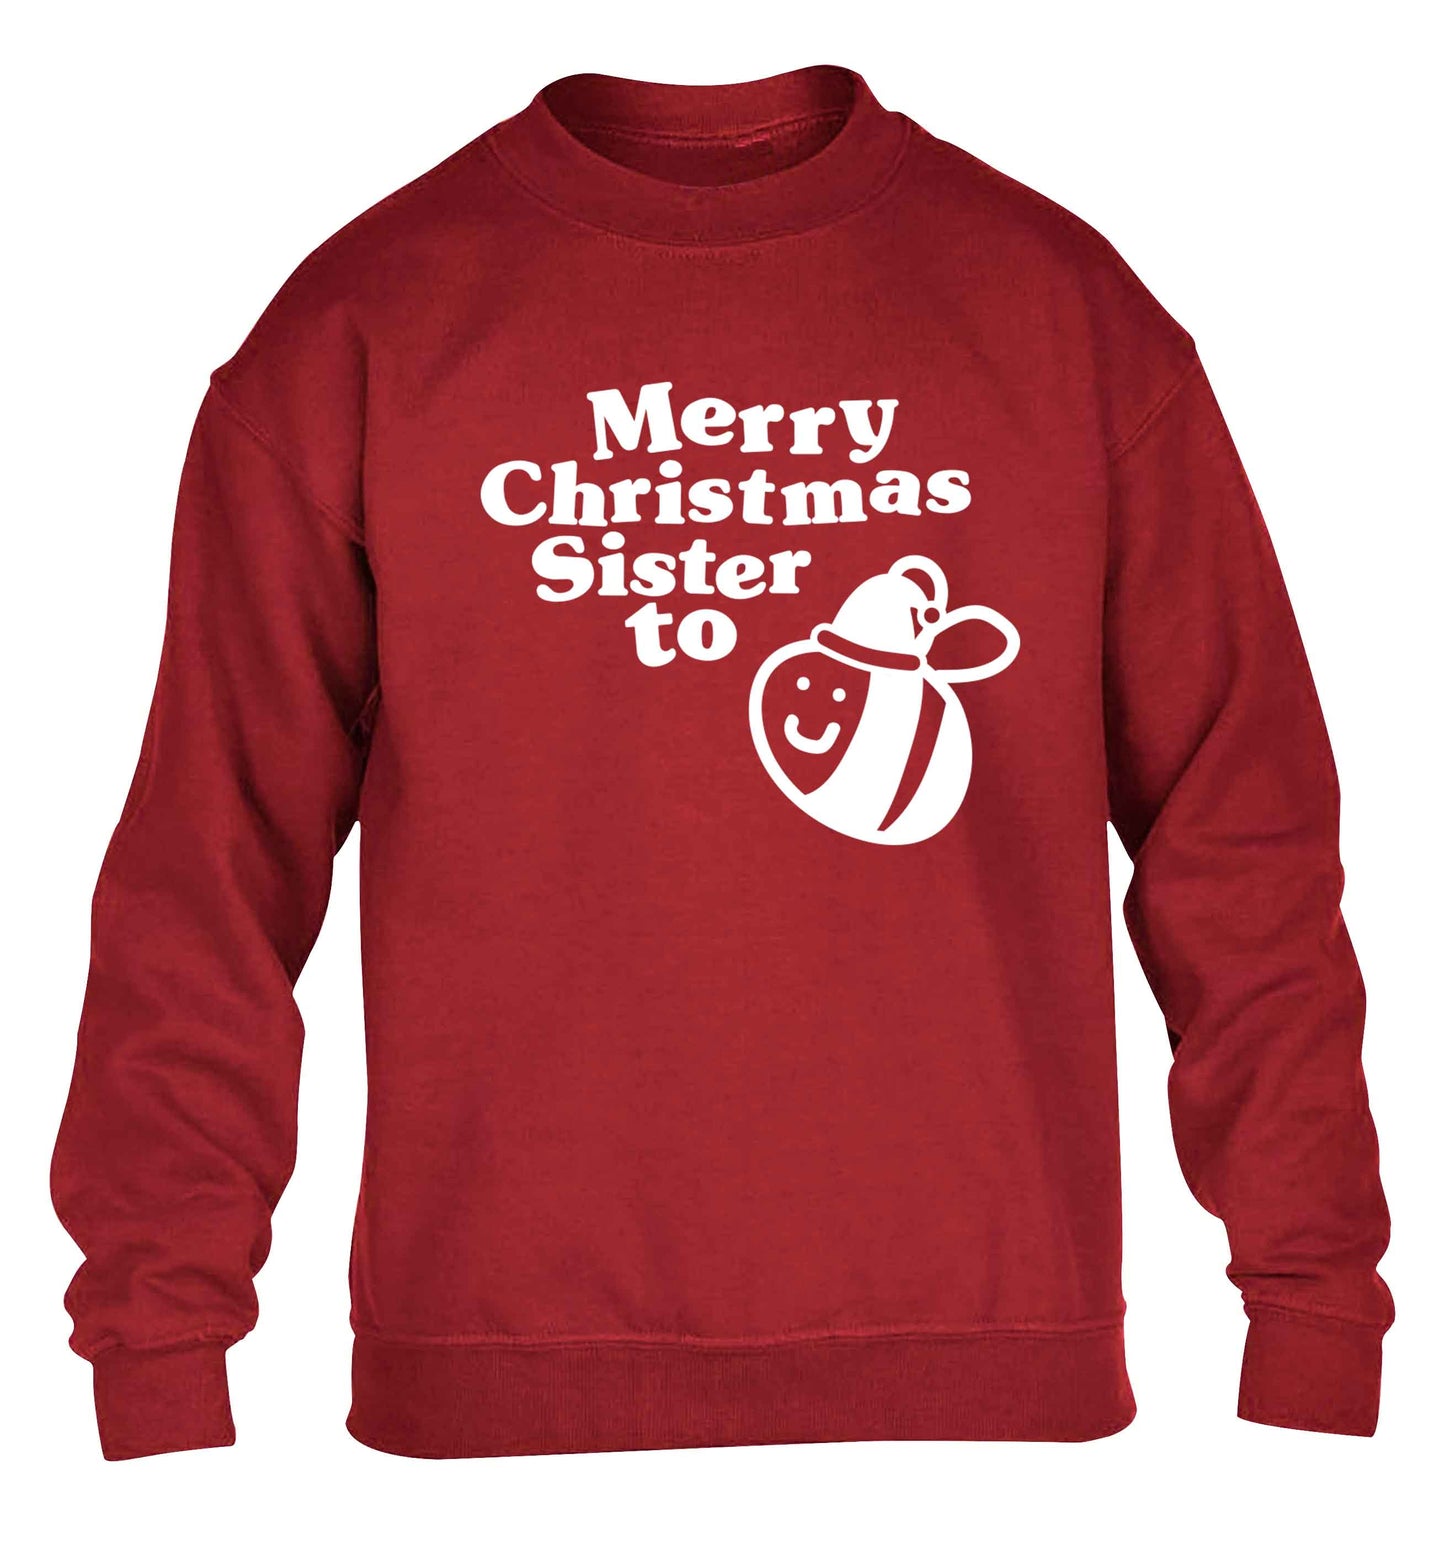 Merry Christmas sister to be children's grey sweater 12-13 Years